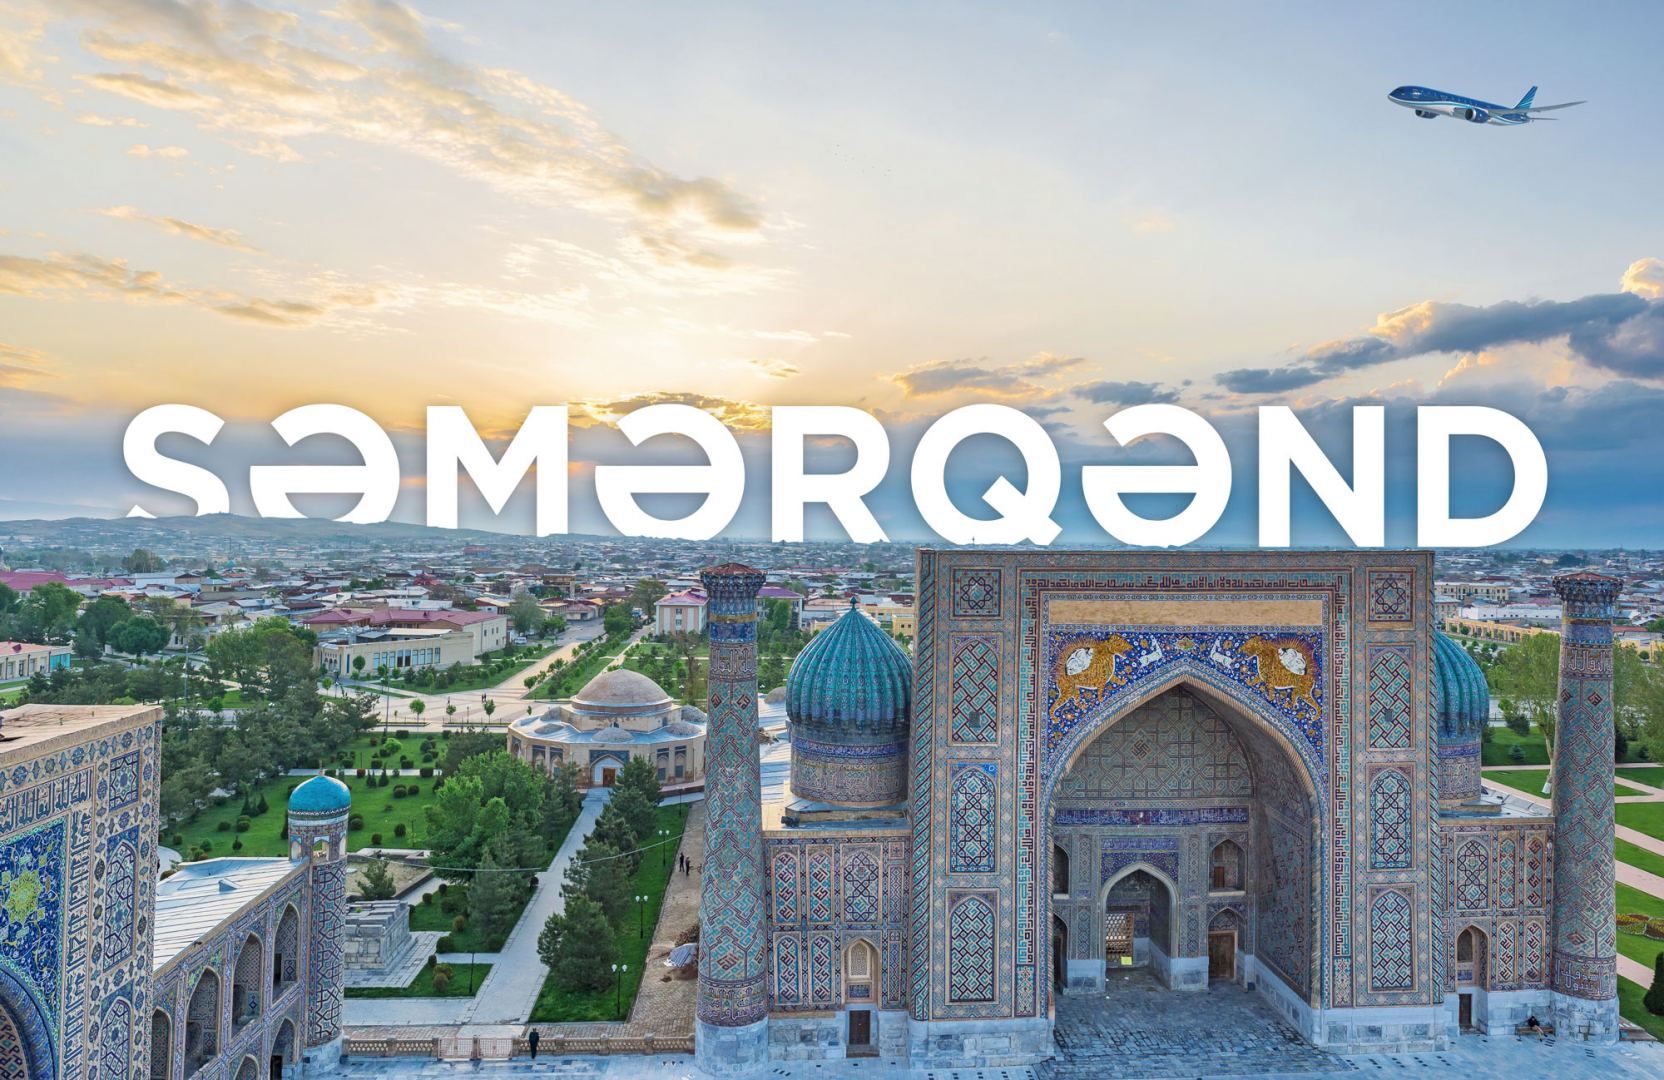 AZAL to launch flights to Samarkand and increase frequency of flights to Tashkent